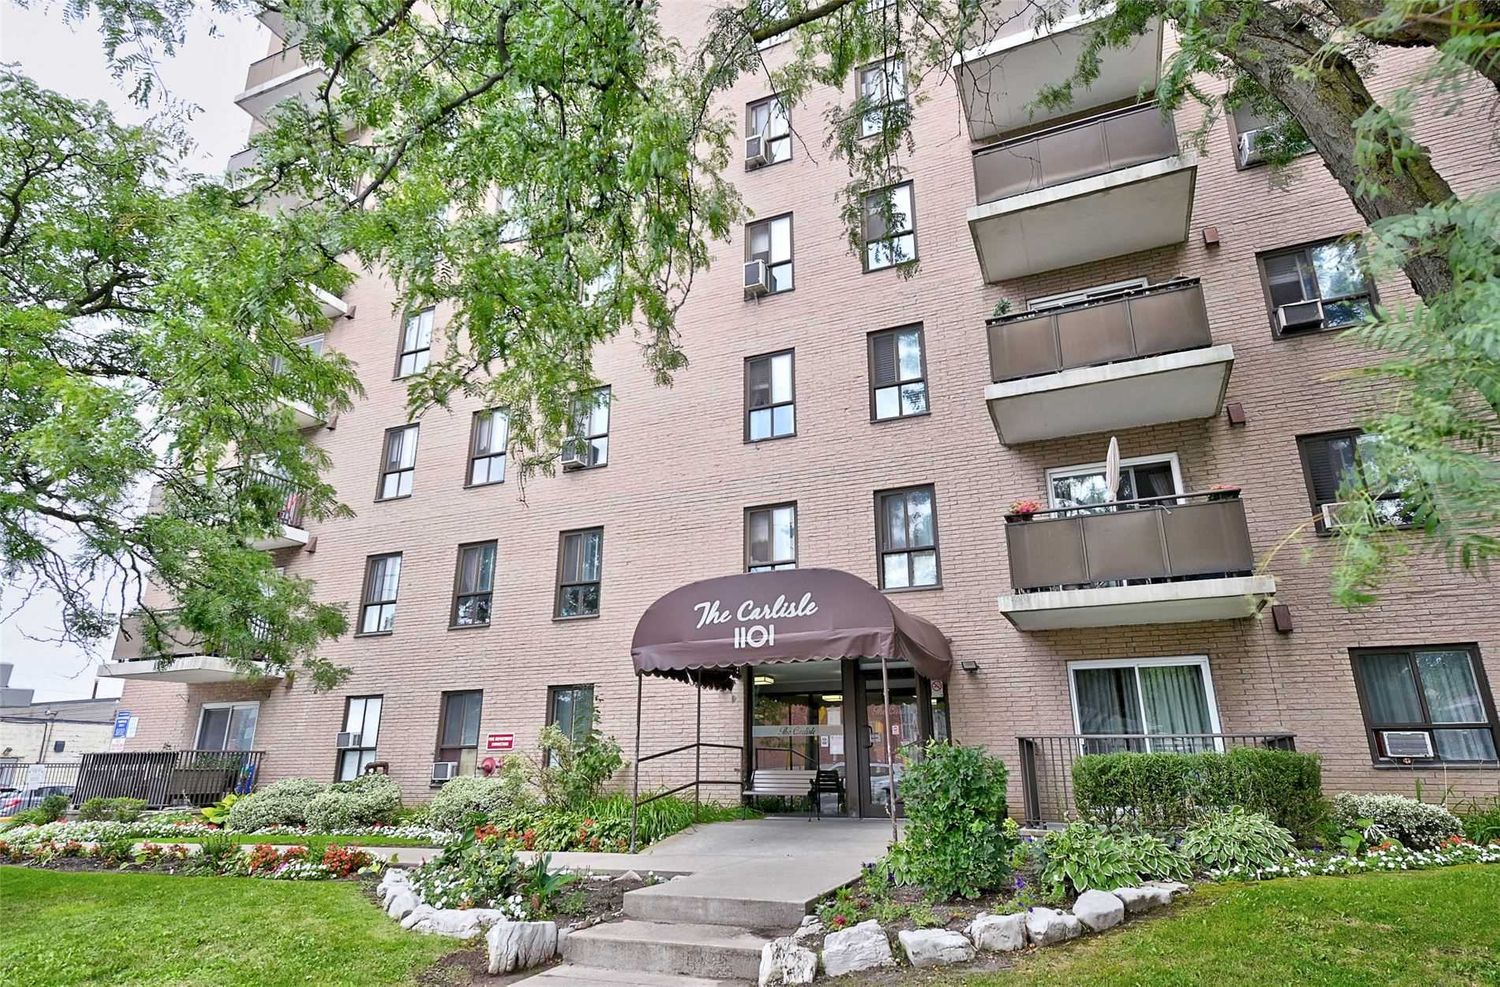 1101 Pharmacy Avenue. The Carlisle Condos is located in  Scarborough, Toronto - image #2 of 2